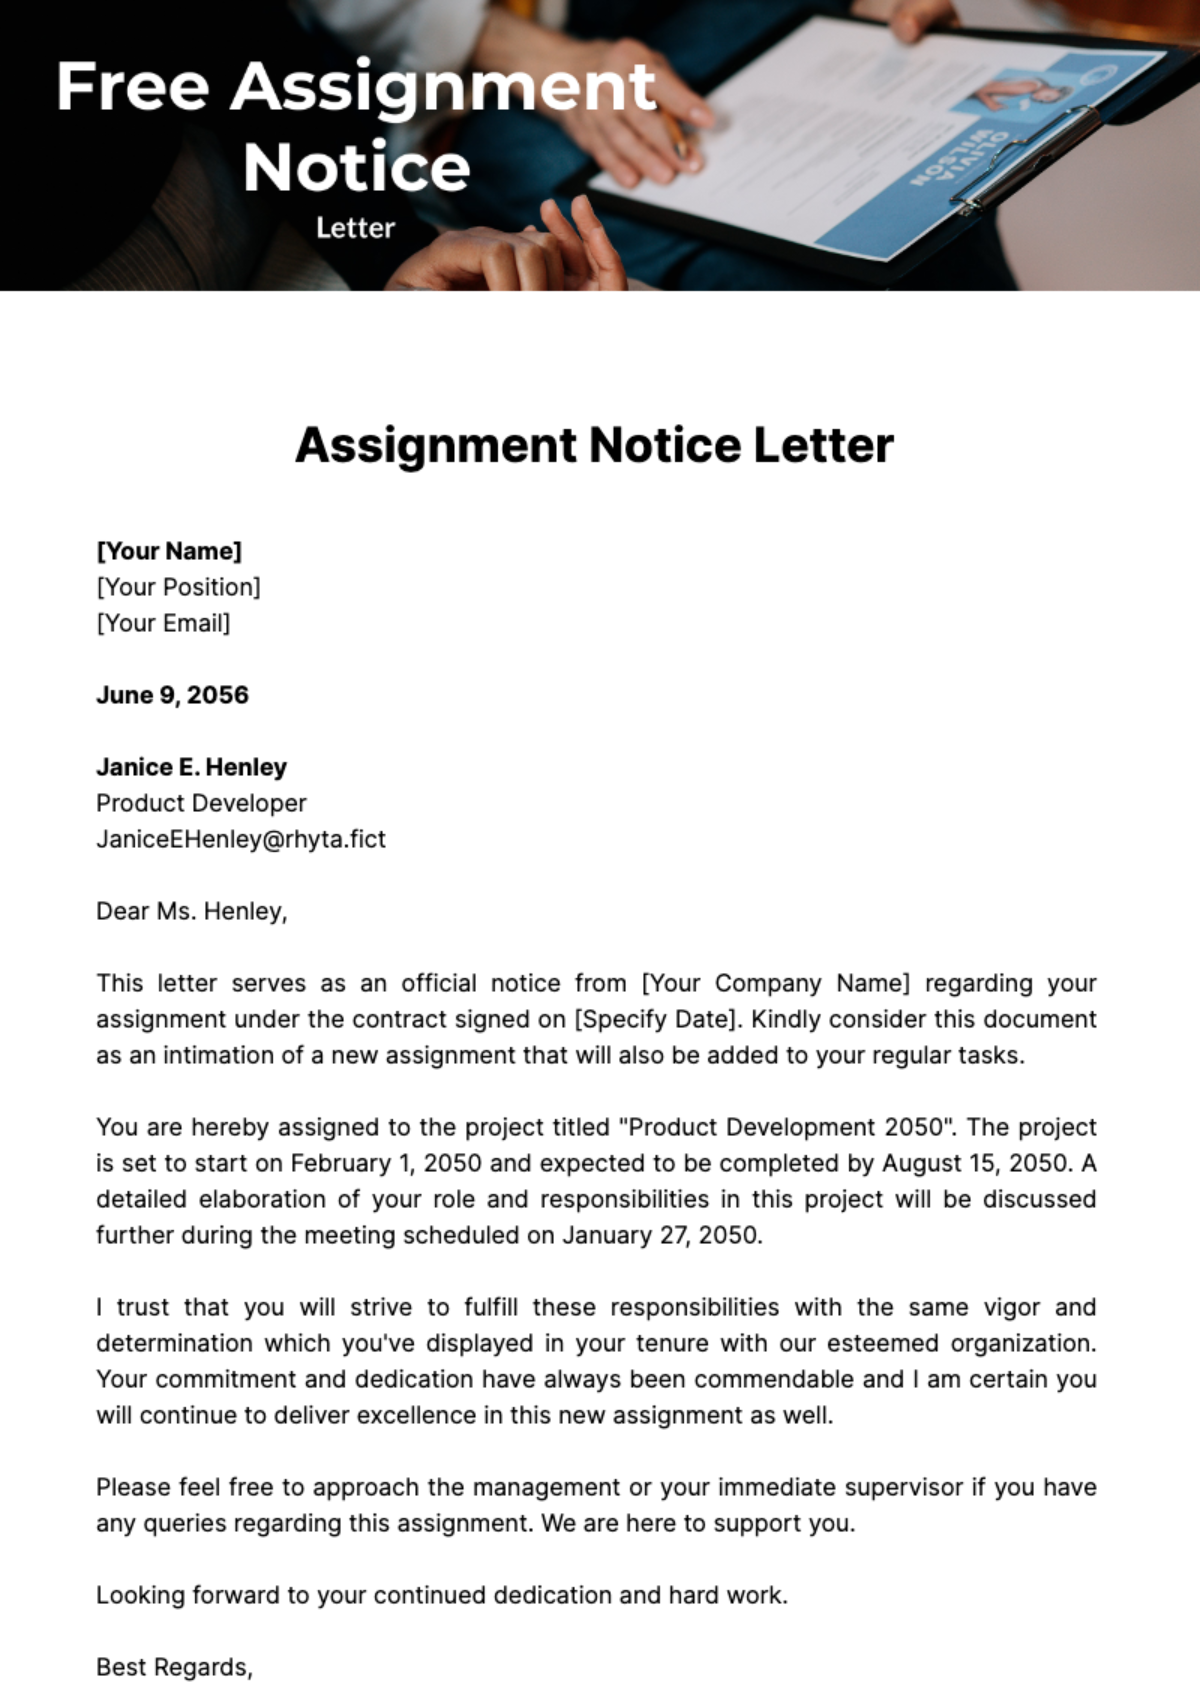 Free Assignment Notice Letter Template